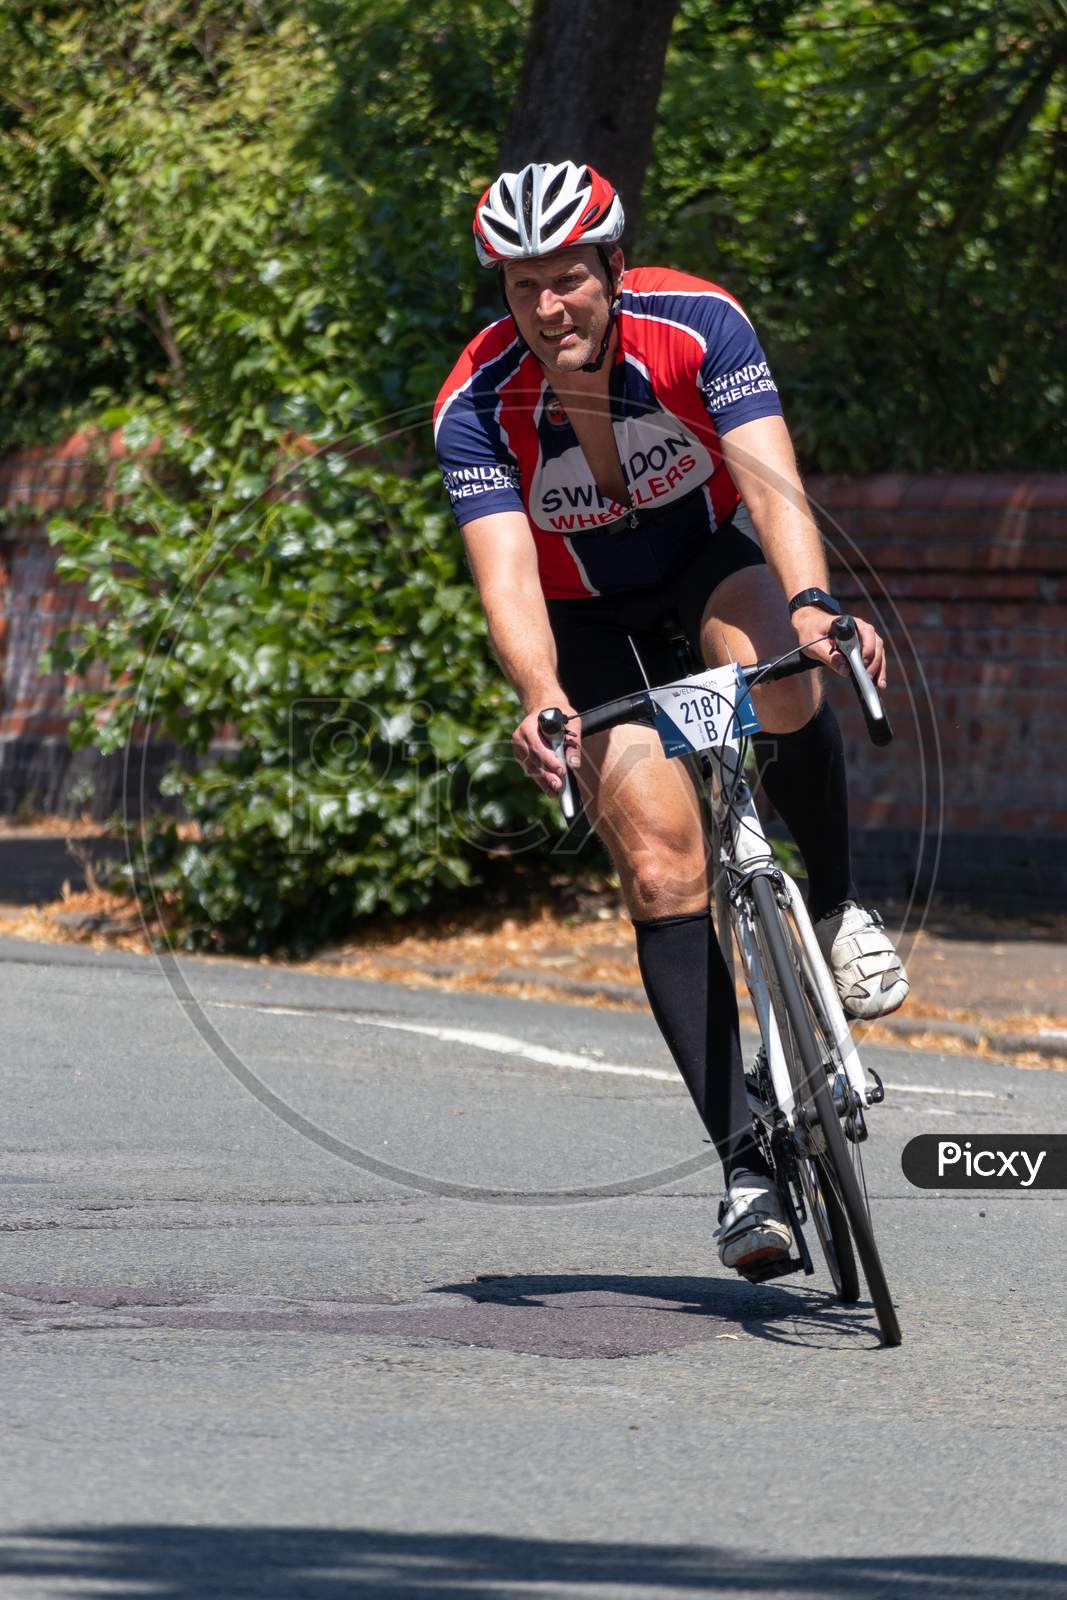 Cardiff, Wales/Uk - July 8 : Cyclist Participating In The Velothon Cycling Event In Cardiff Wales On July 8, 2018. One Unidentified Person